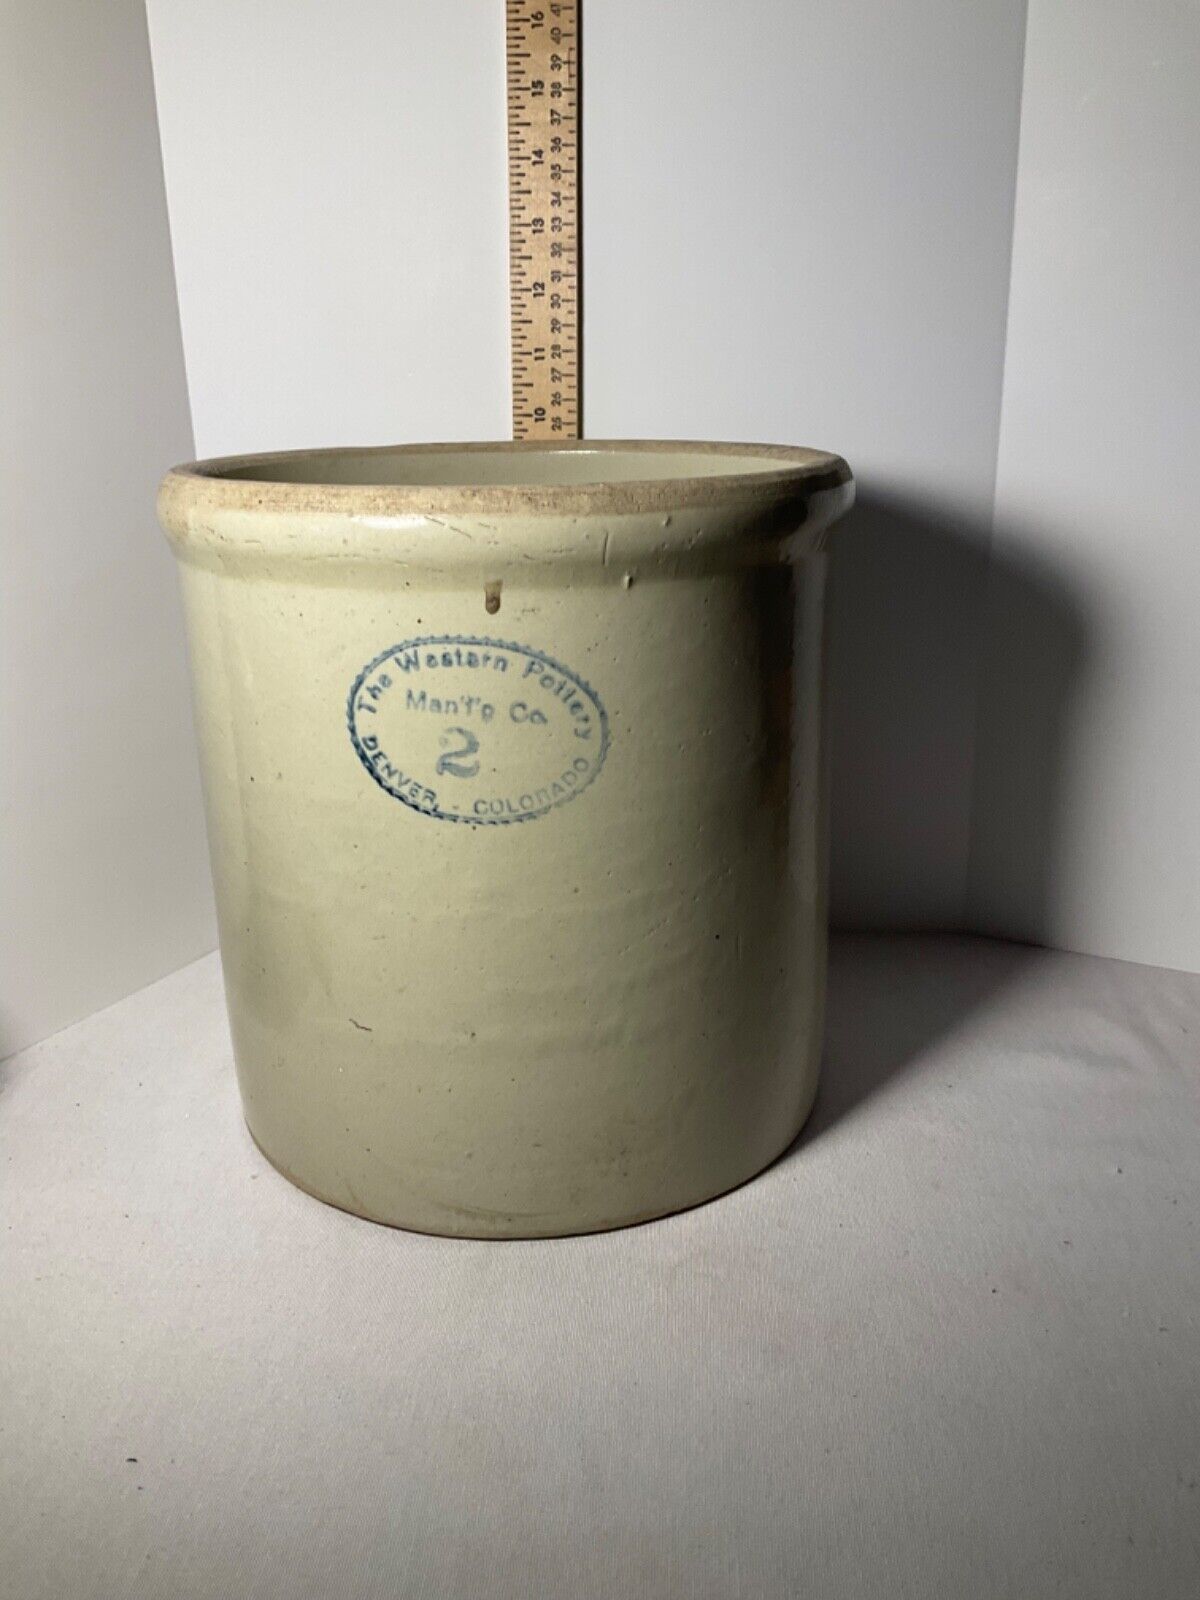 The Western pottery large container/pot Denver Colorado 9 1/2”